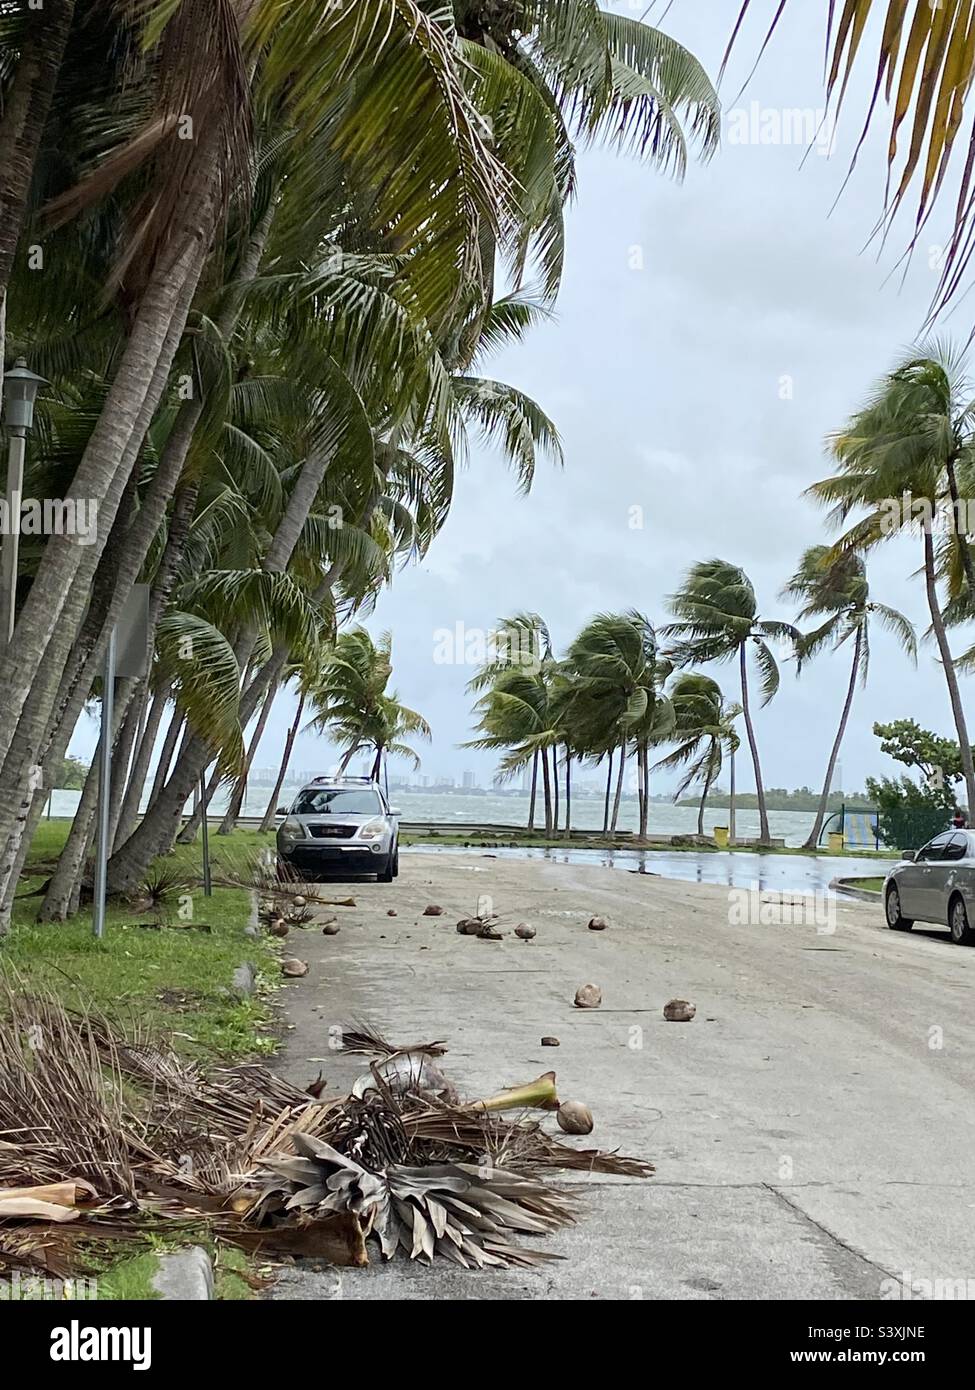 Morning side park in Miami-Dade county hours after Hurricane Ian passed by. Photo shows after math of storm swells and wind damage causing power outages in this waterfront neighborhood. Stock Photo